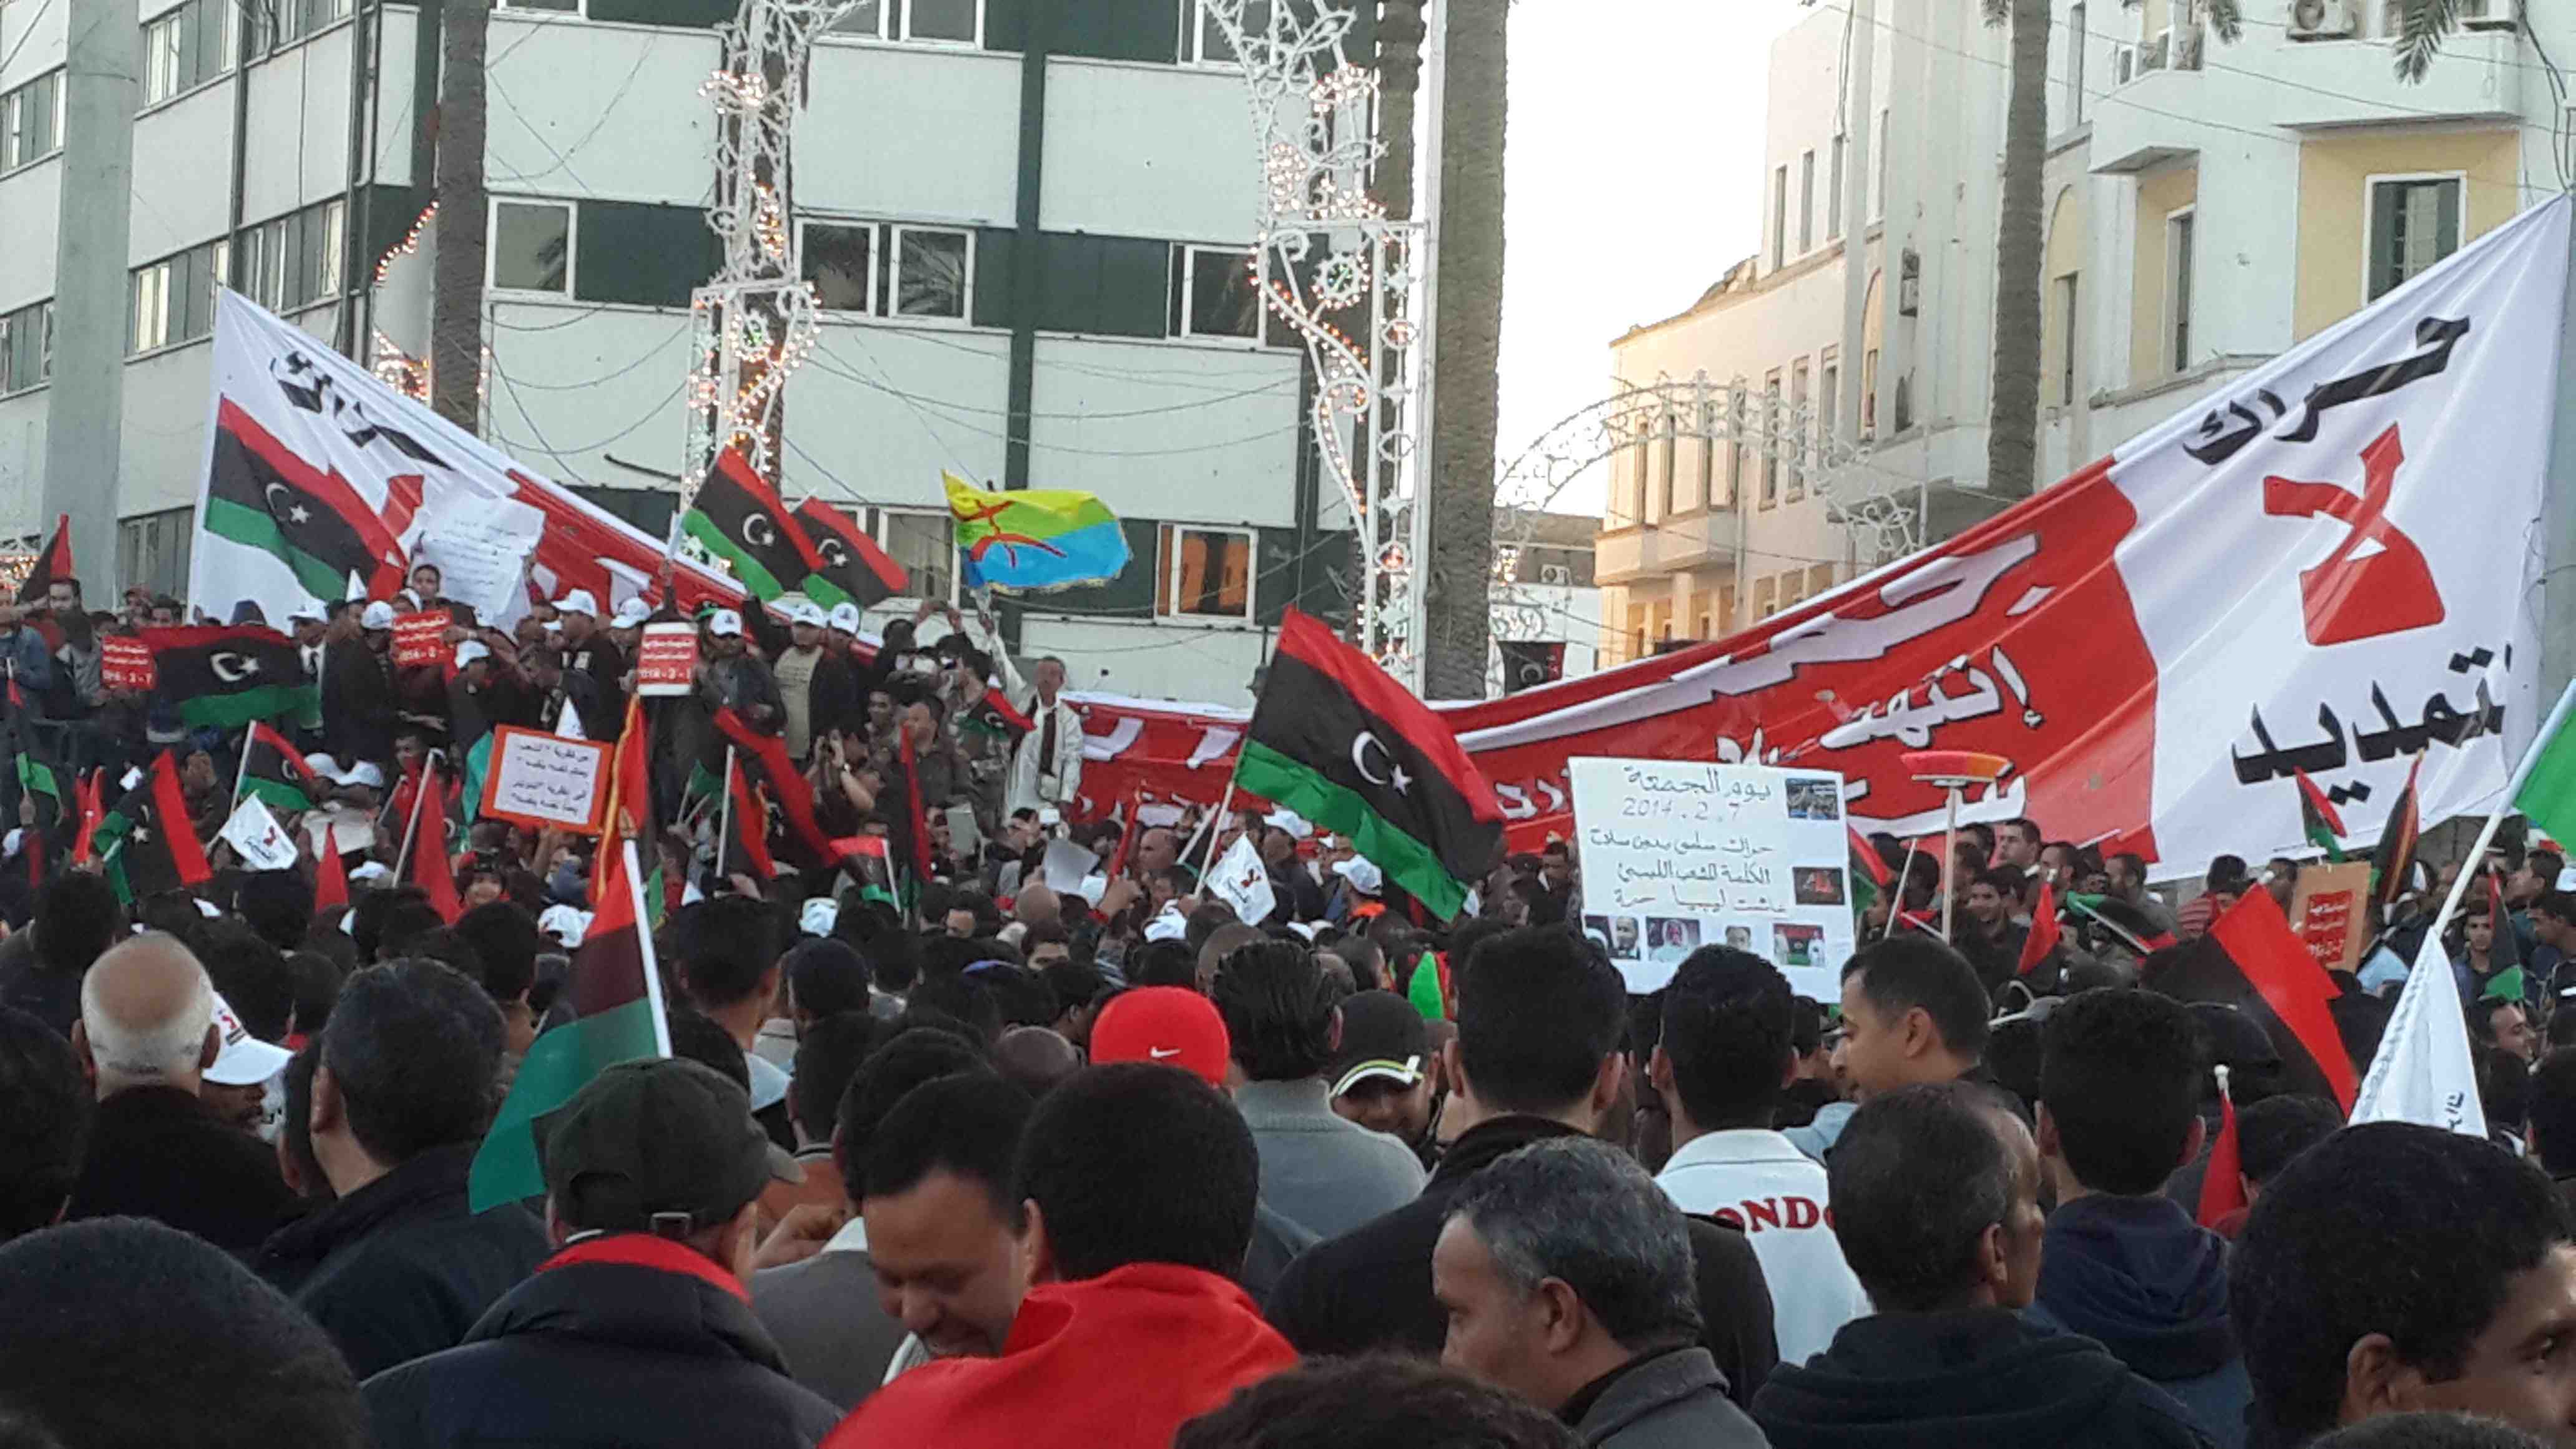 Protesters in Tripoli's Martyrs' Square (Photo:Ahmed Elumami)